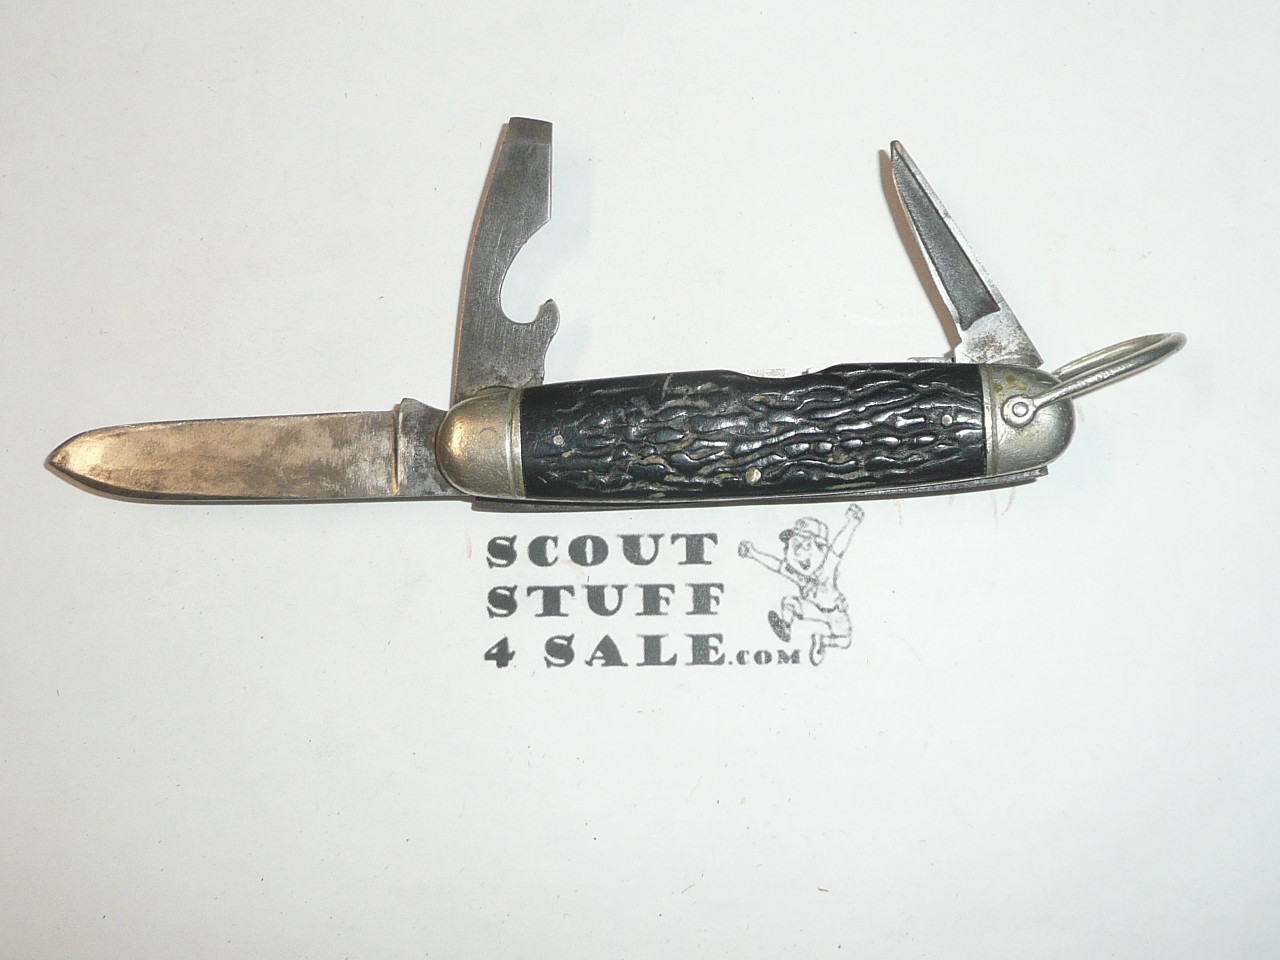 Boy Scout Knife, Universal Manufacturer, 1930's, Very good used condition but the can opener is missing (PAT6)